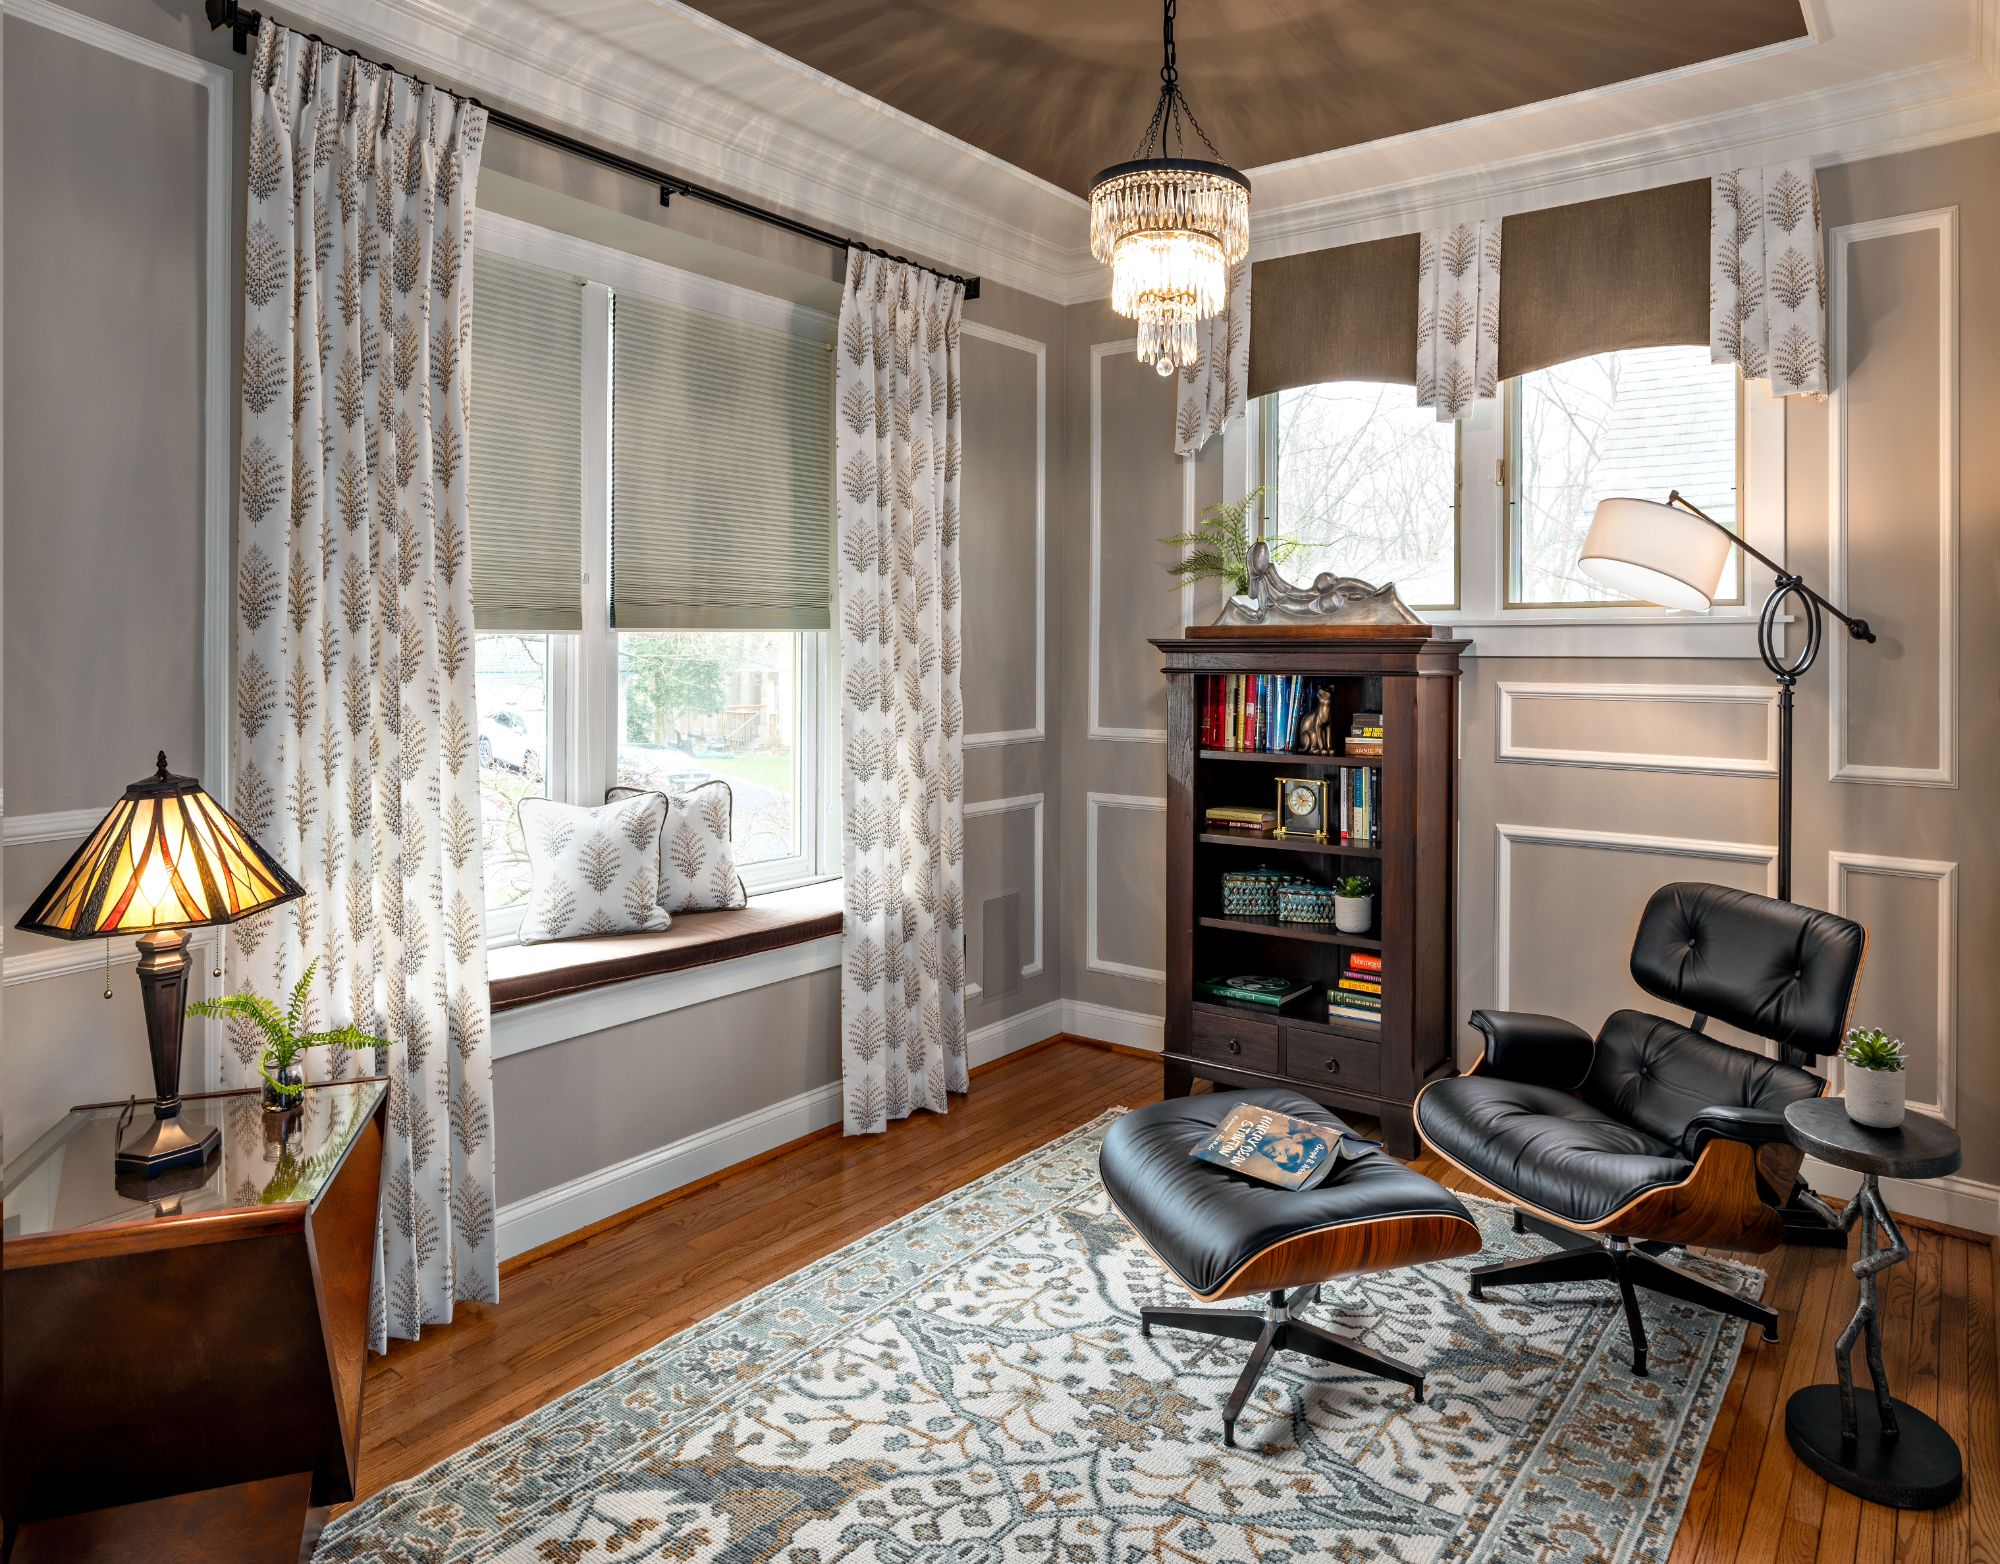 Give your home office a modern touch with these tips